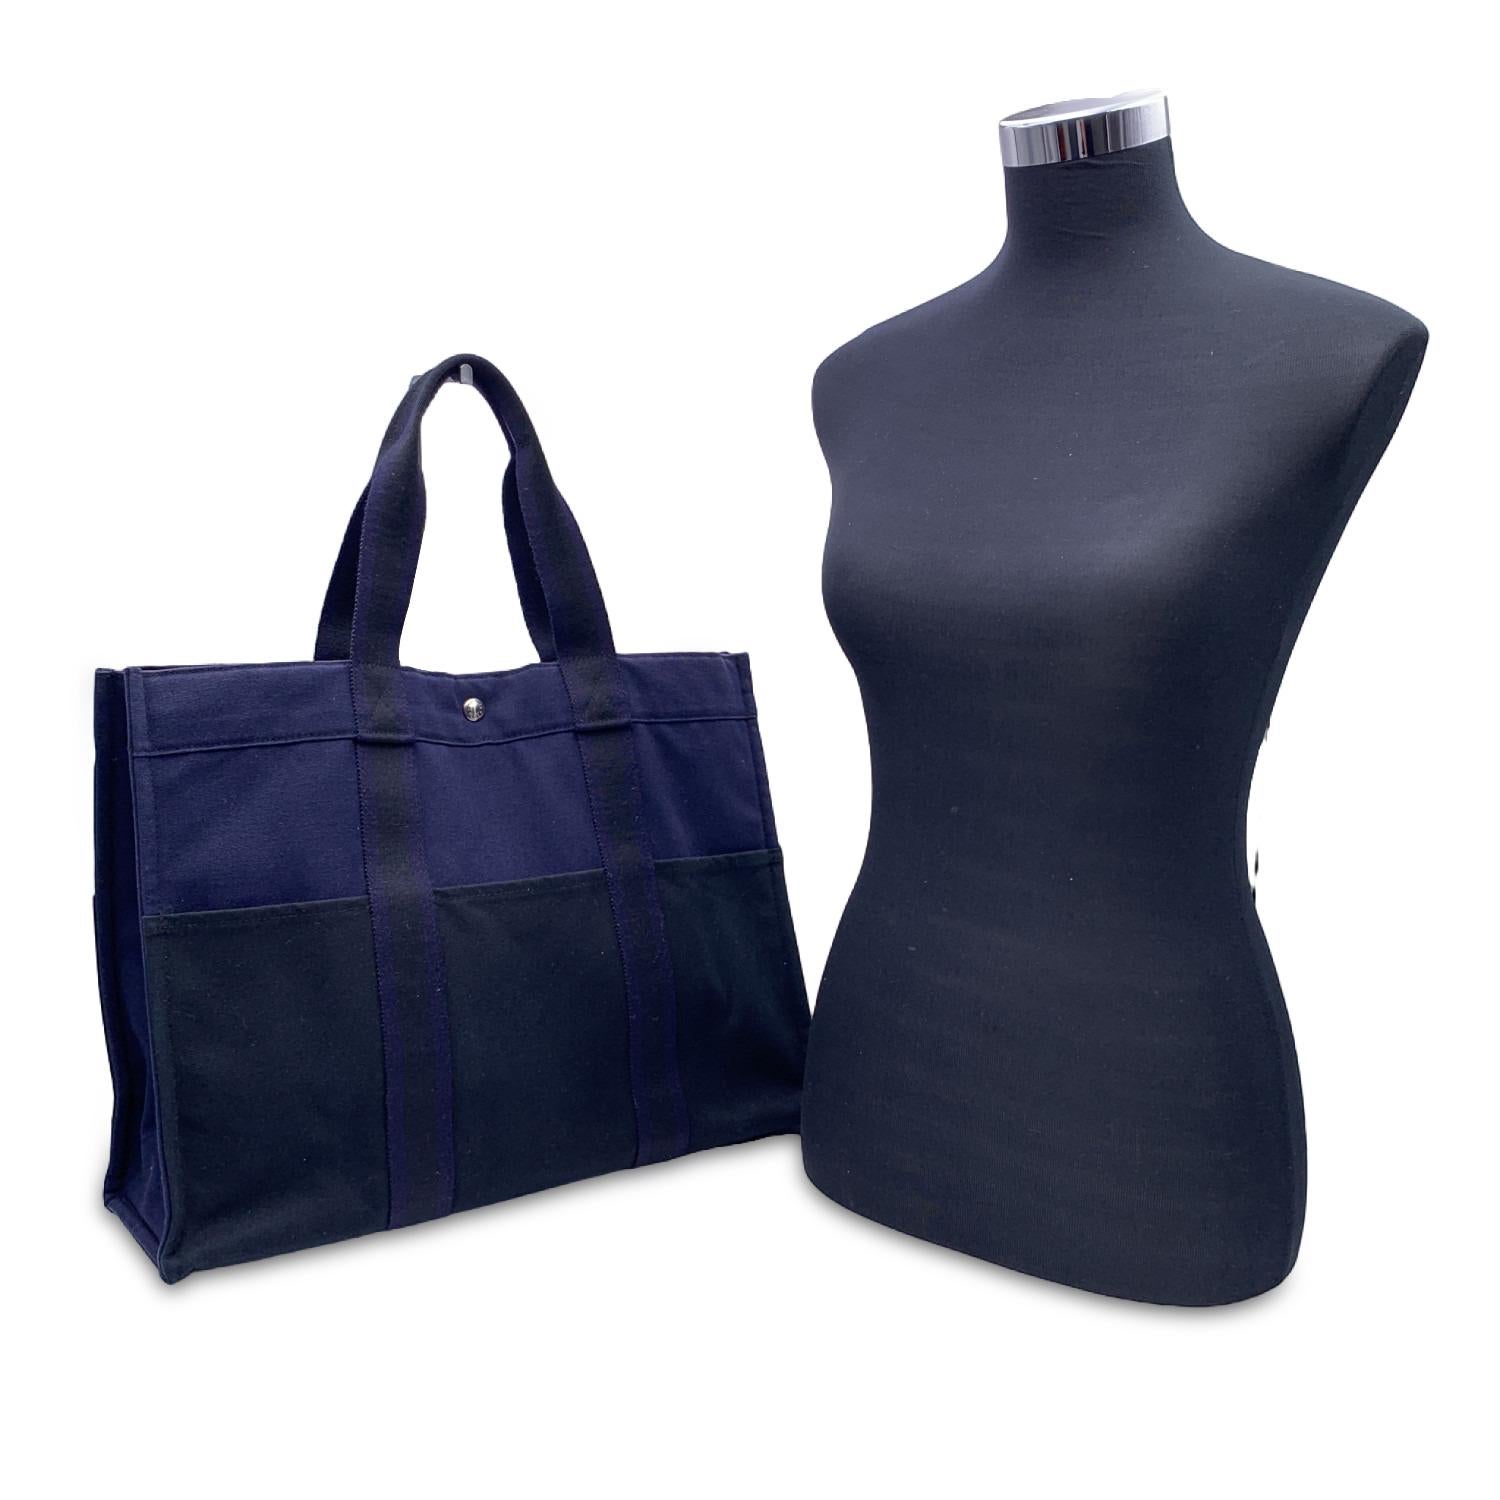 'HERMES FOURRE TOUT - GM' - Tote handbag. Made in France. Blue color with black stripes. Material: 100% cotton. It has snaps on both ends for expansion. Durable canvas handles, perfect for casual and everyday use. 3 open pockets on the front and 3